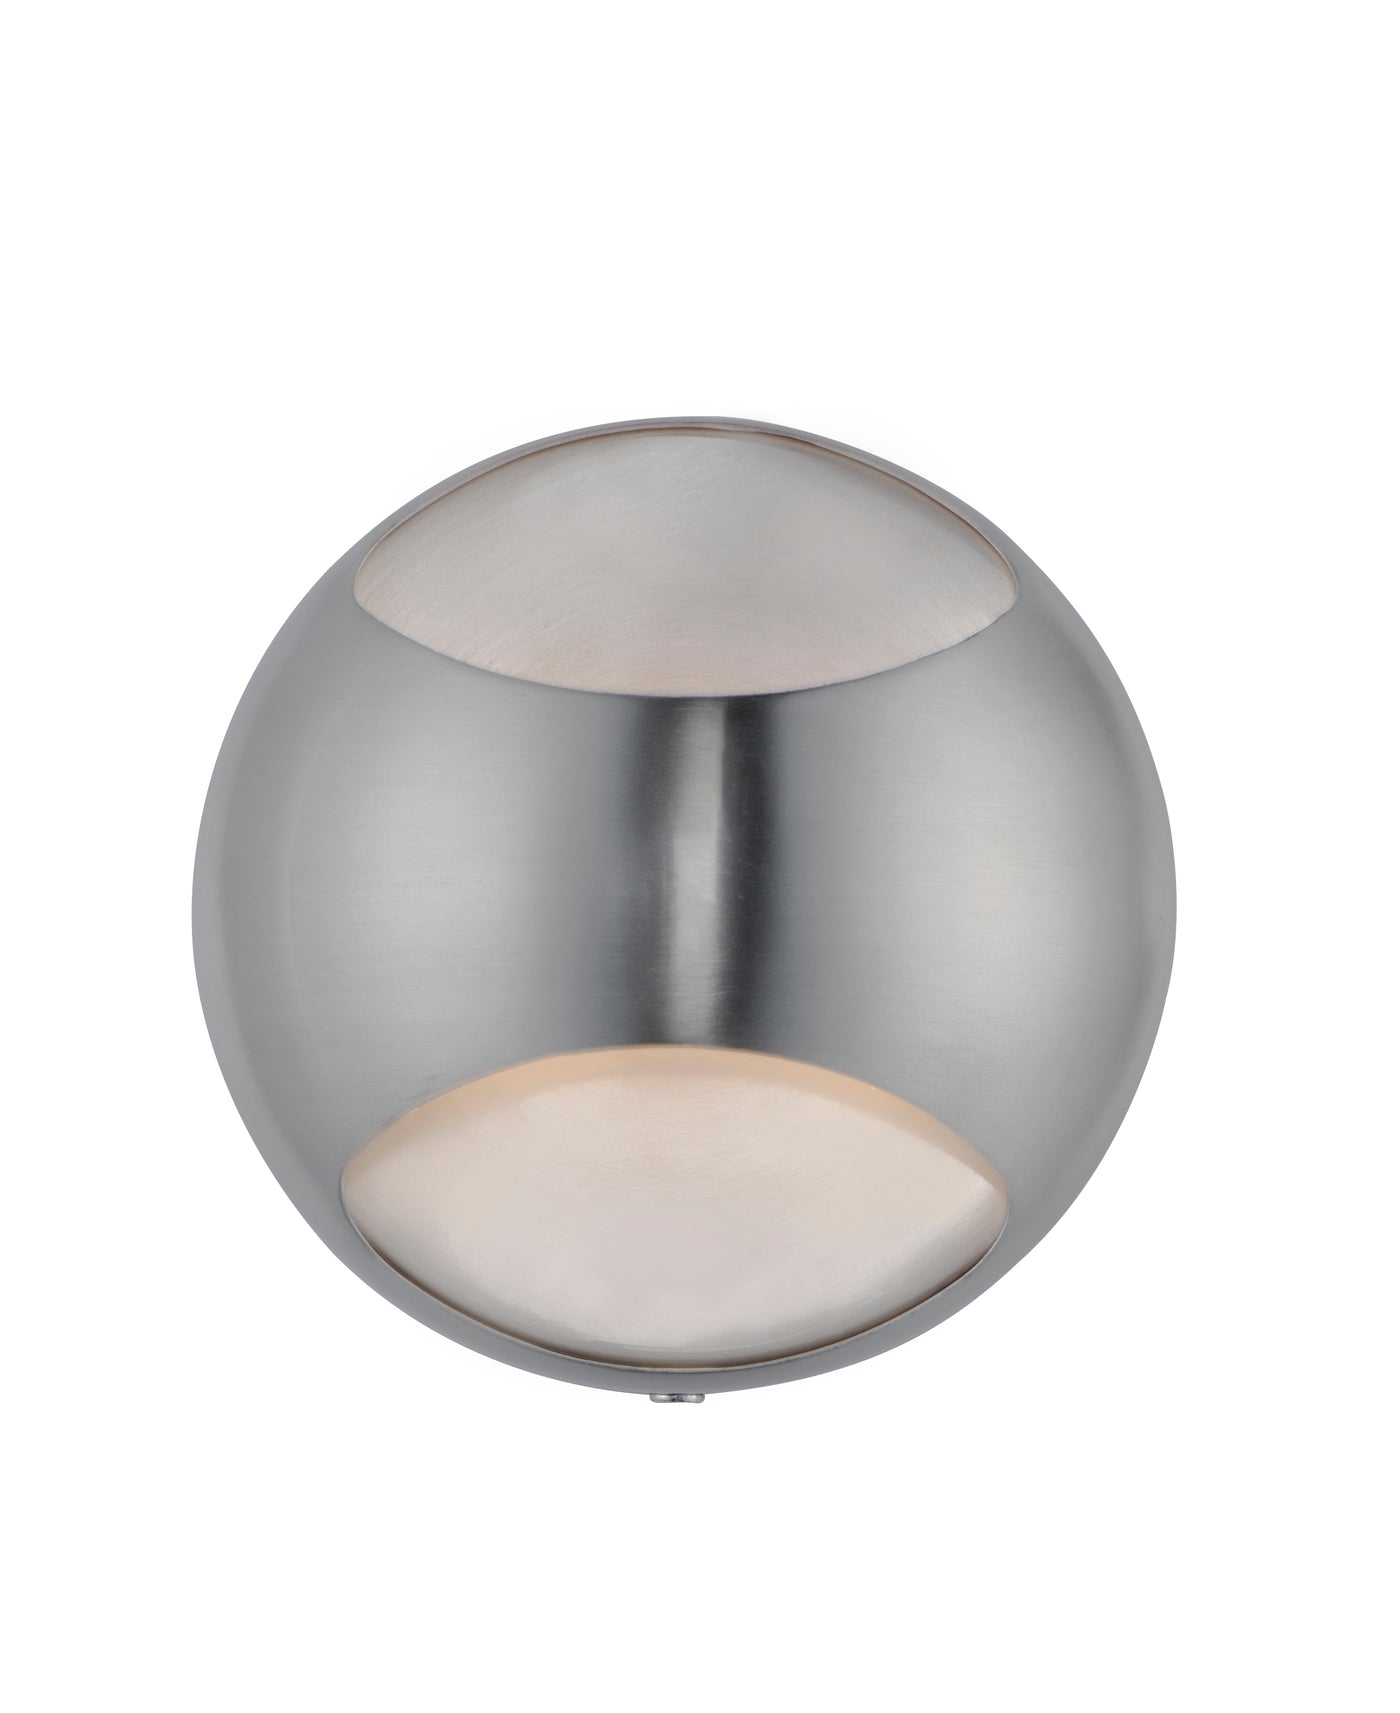  Wink LED Wall Sconce E20542-SN 